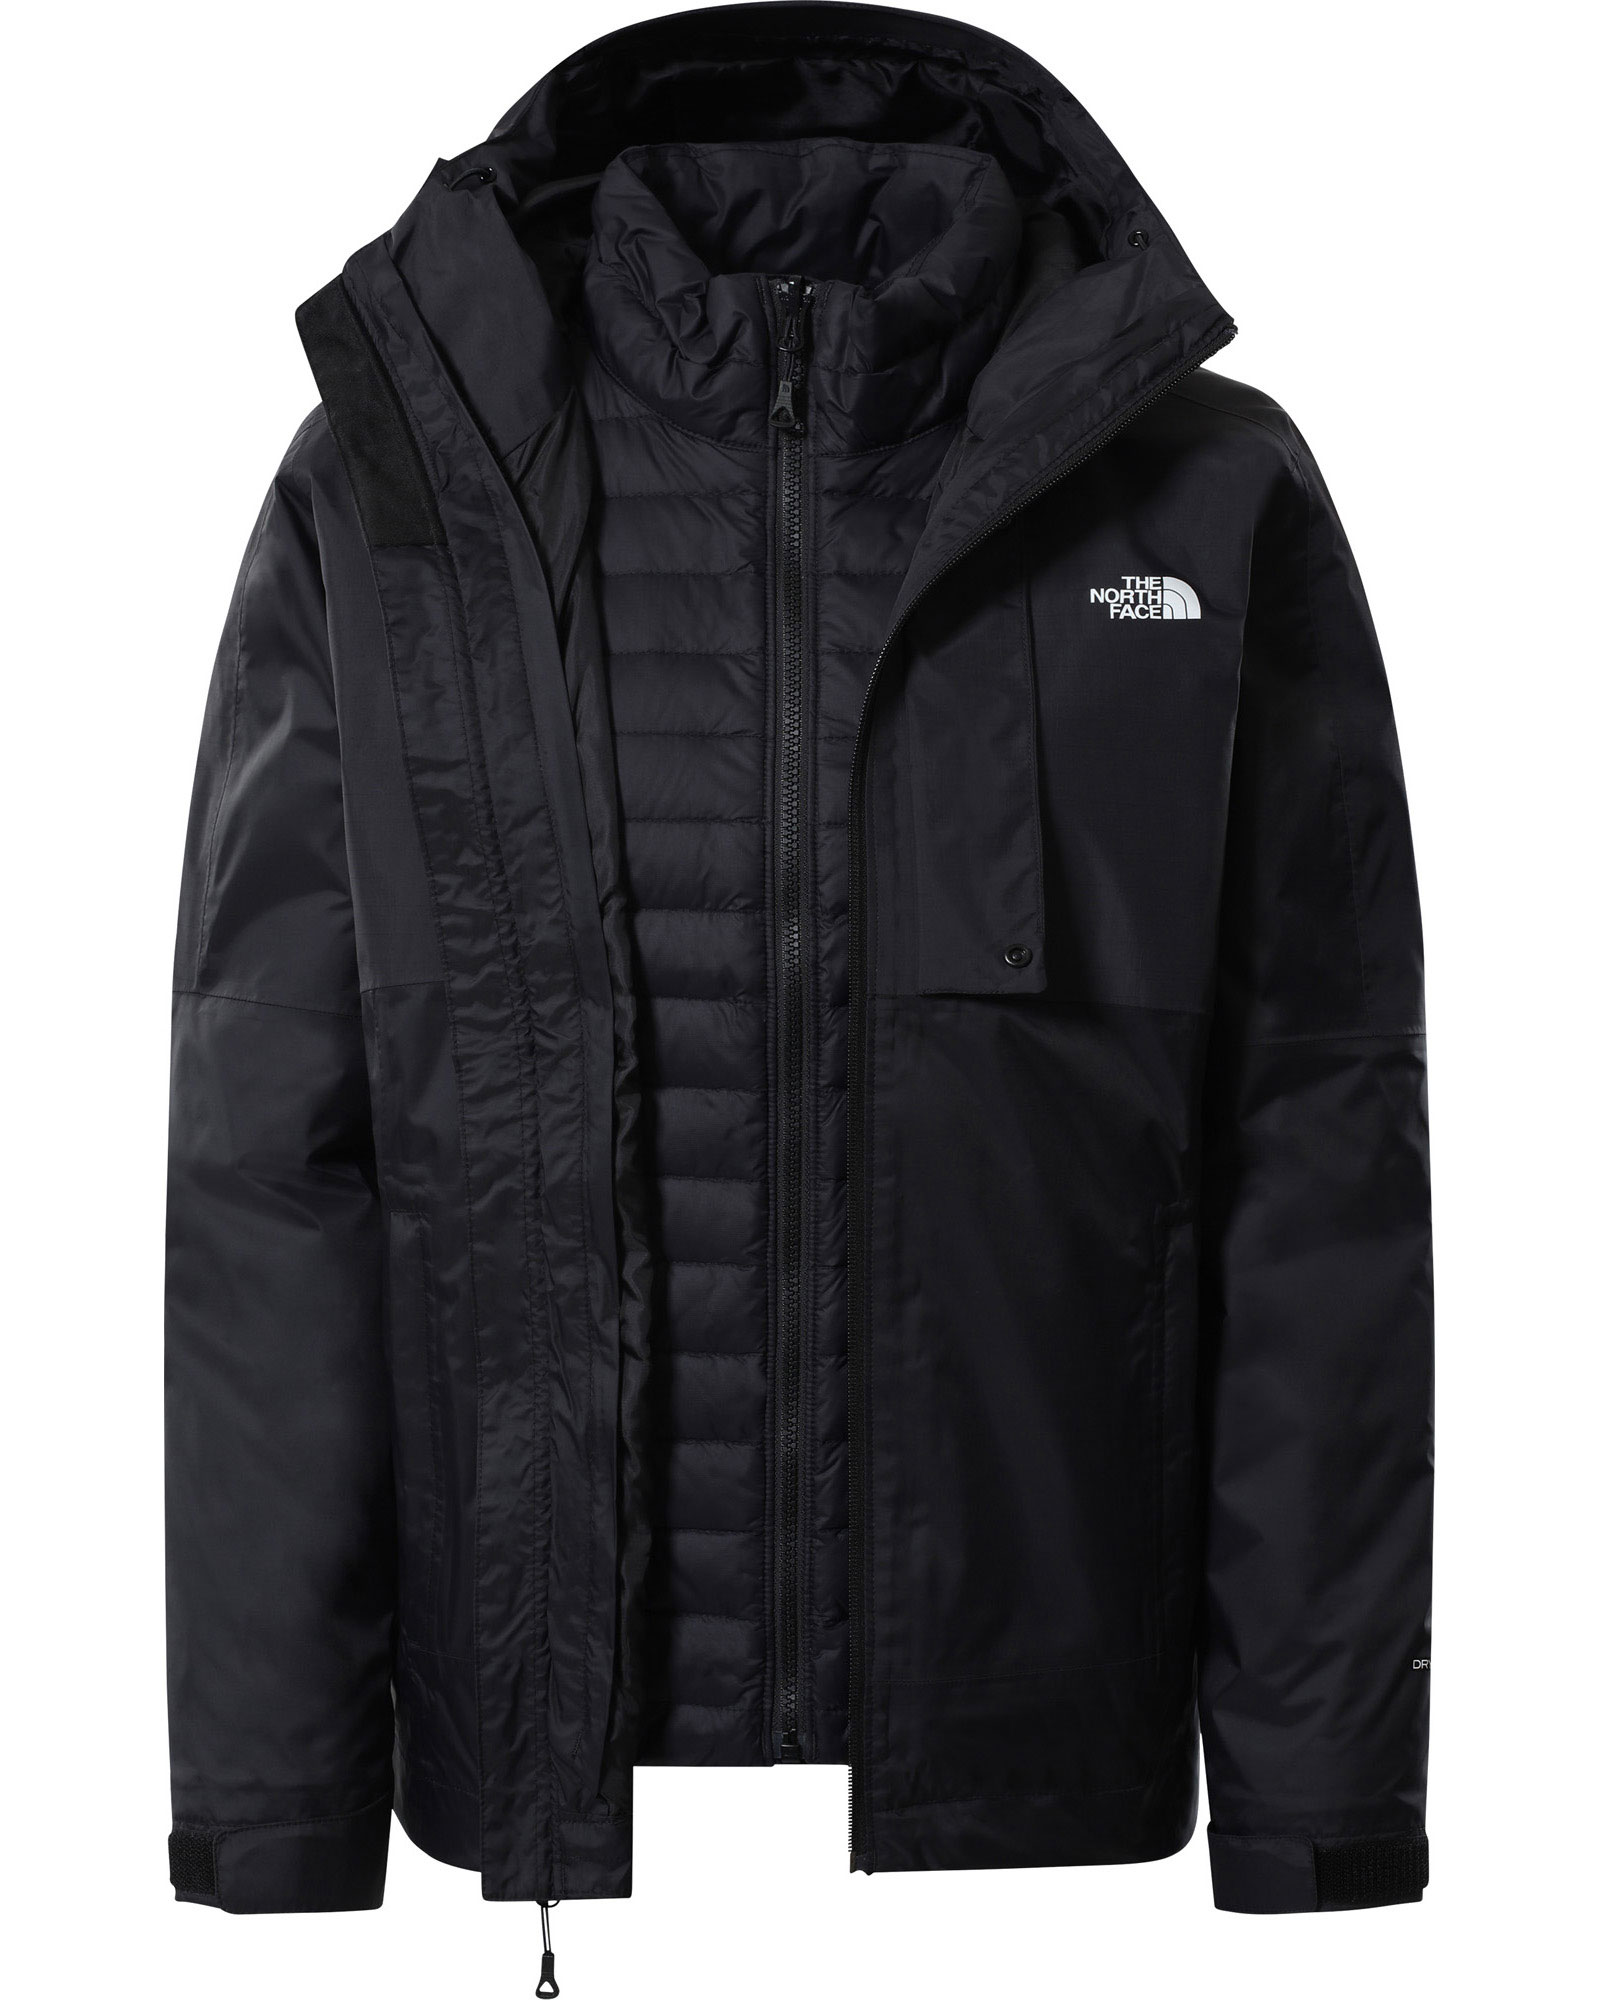 The North Face Down Insulated Triclimate Women’s Parka Jacket - TNF Black XL